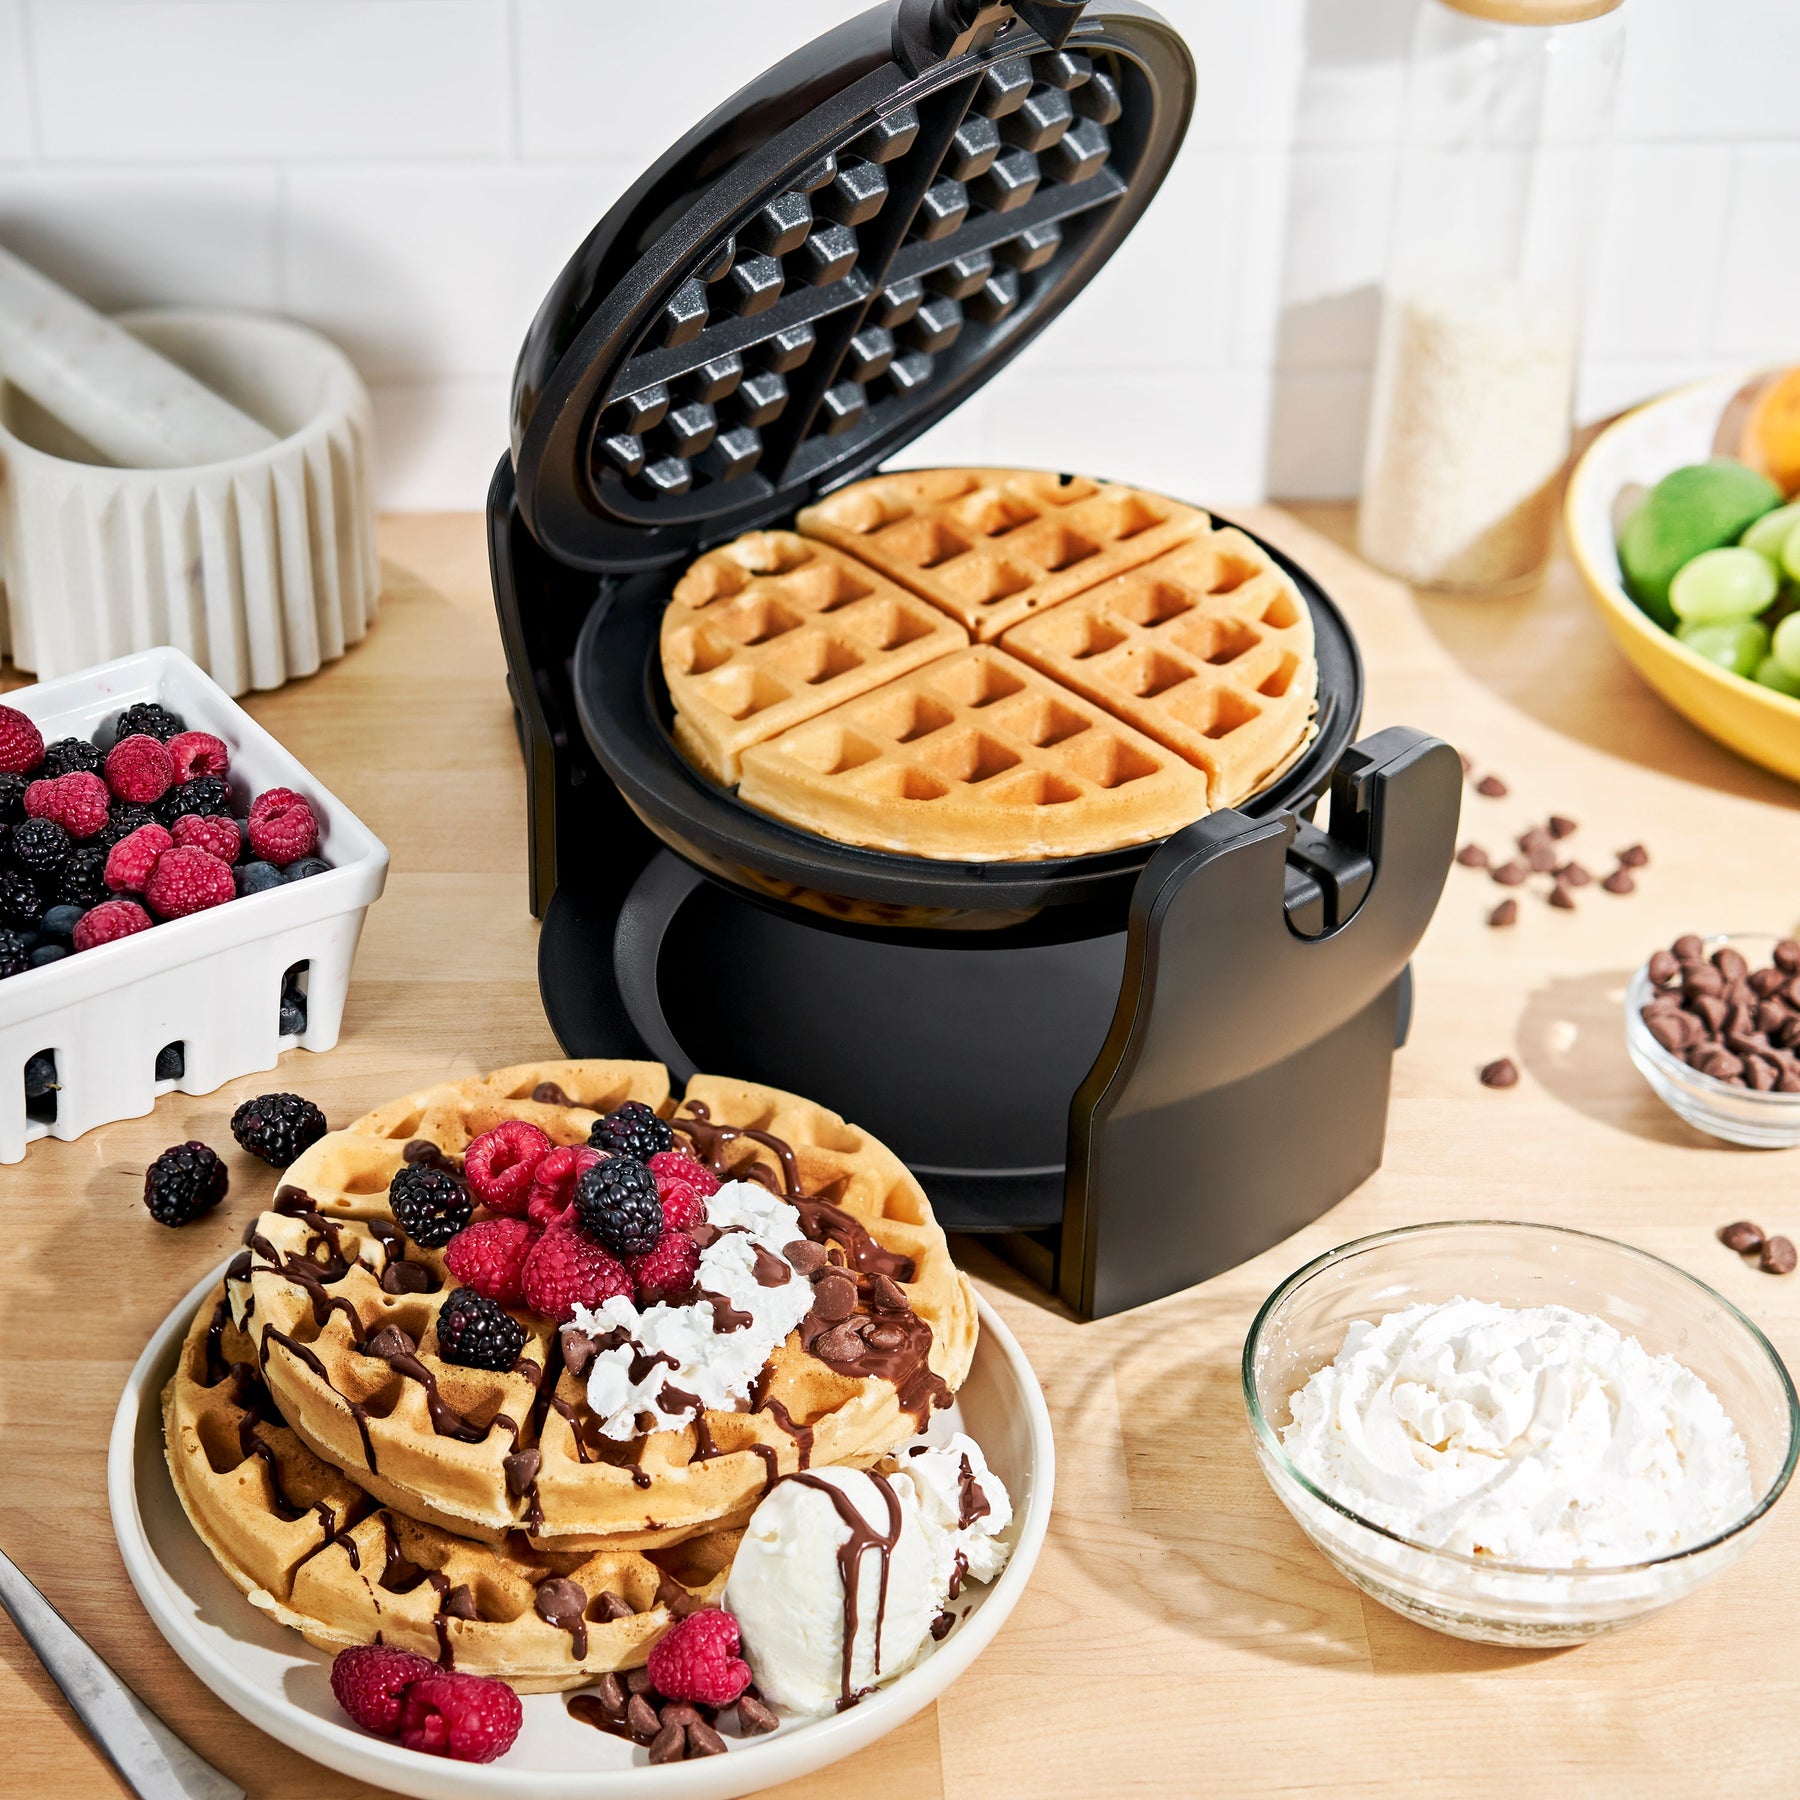 Bella Rotating Stainless Steel Waffle Maker